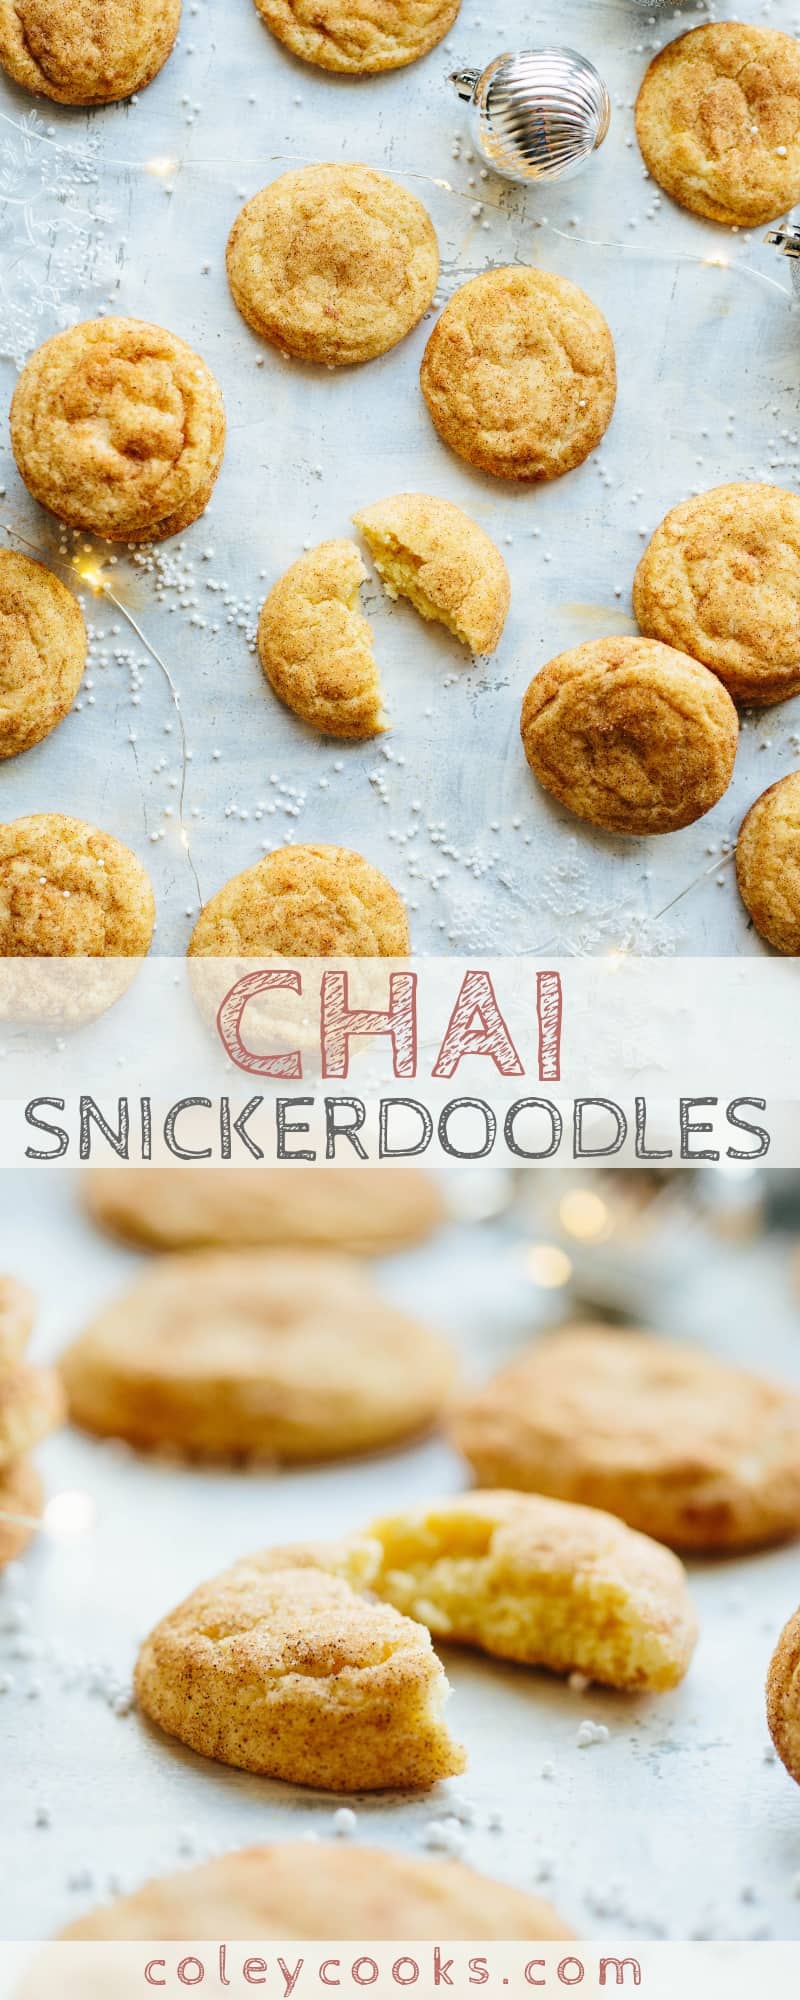 These Chai Snickerdoodles are a fun twist on this classic cookie! A fragrant mix of spices replaces the traditional cinnamon for a chewy cookie that tastes just like a cup of chai tea! #easy #christmas #cookie #recipe #chai #tea #snickerdoodle #dessert